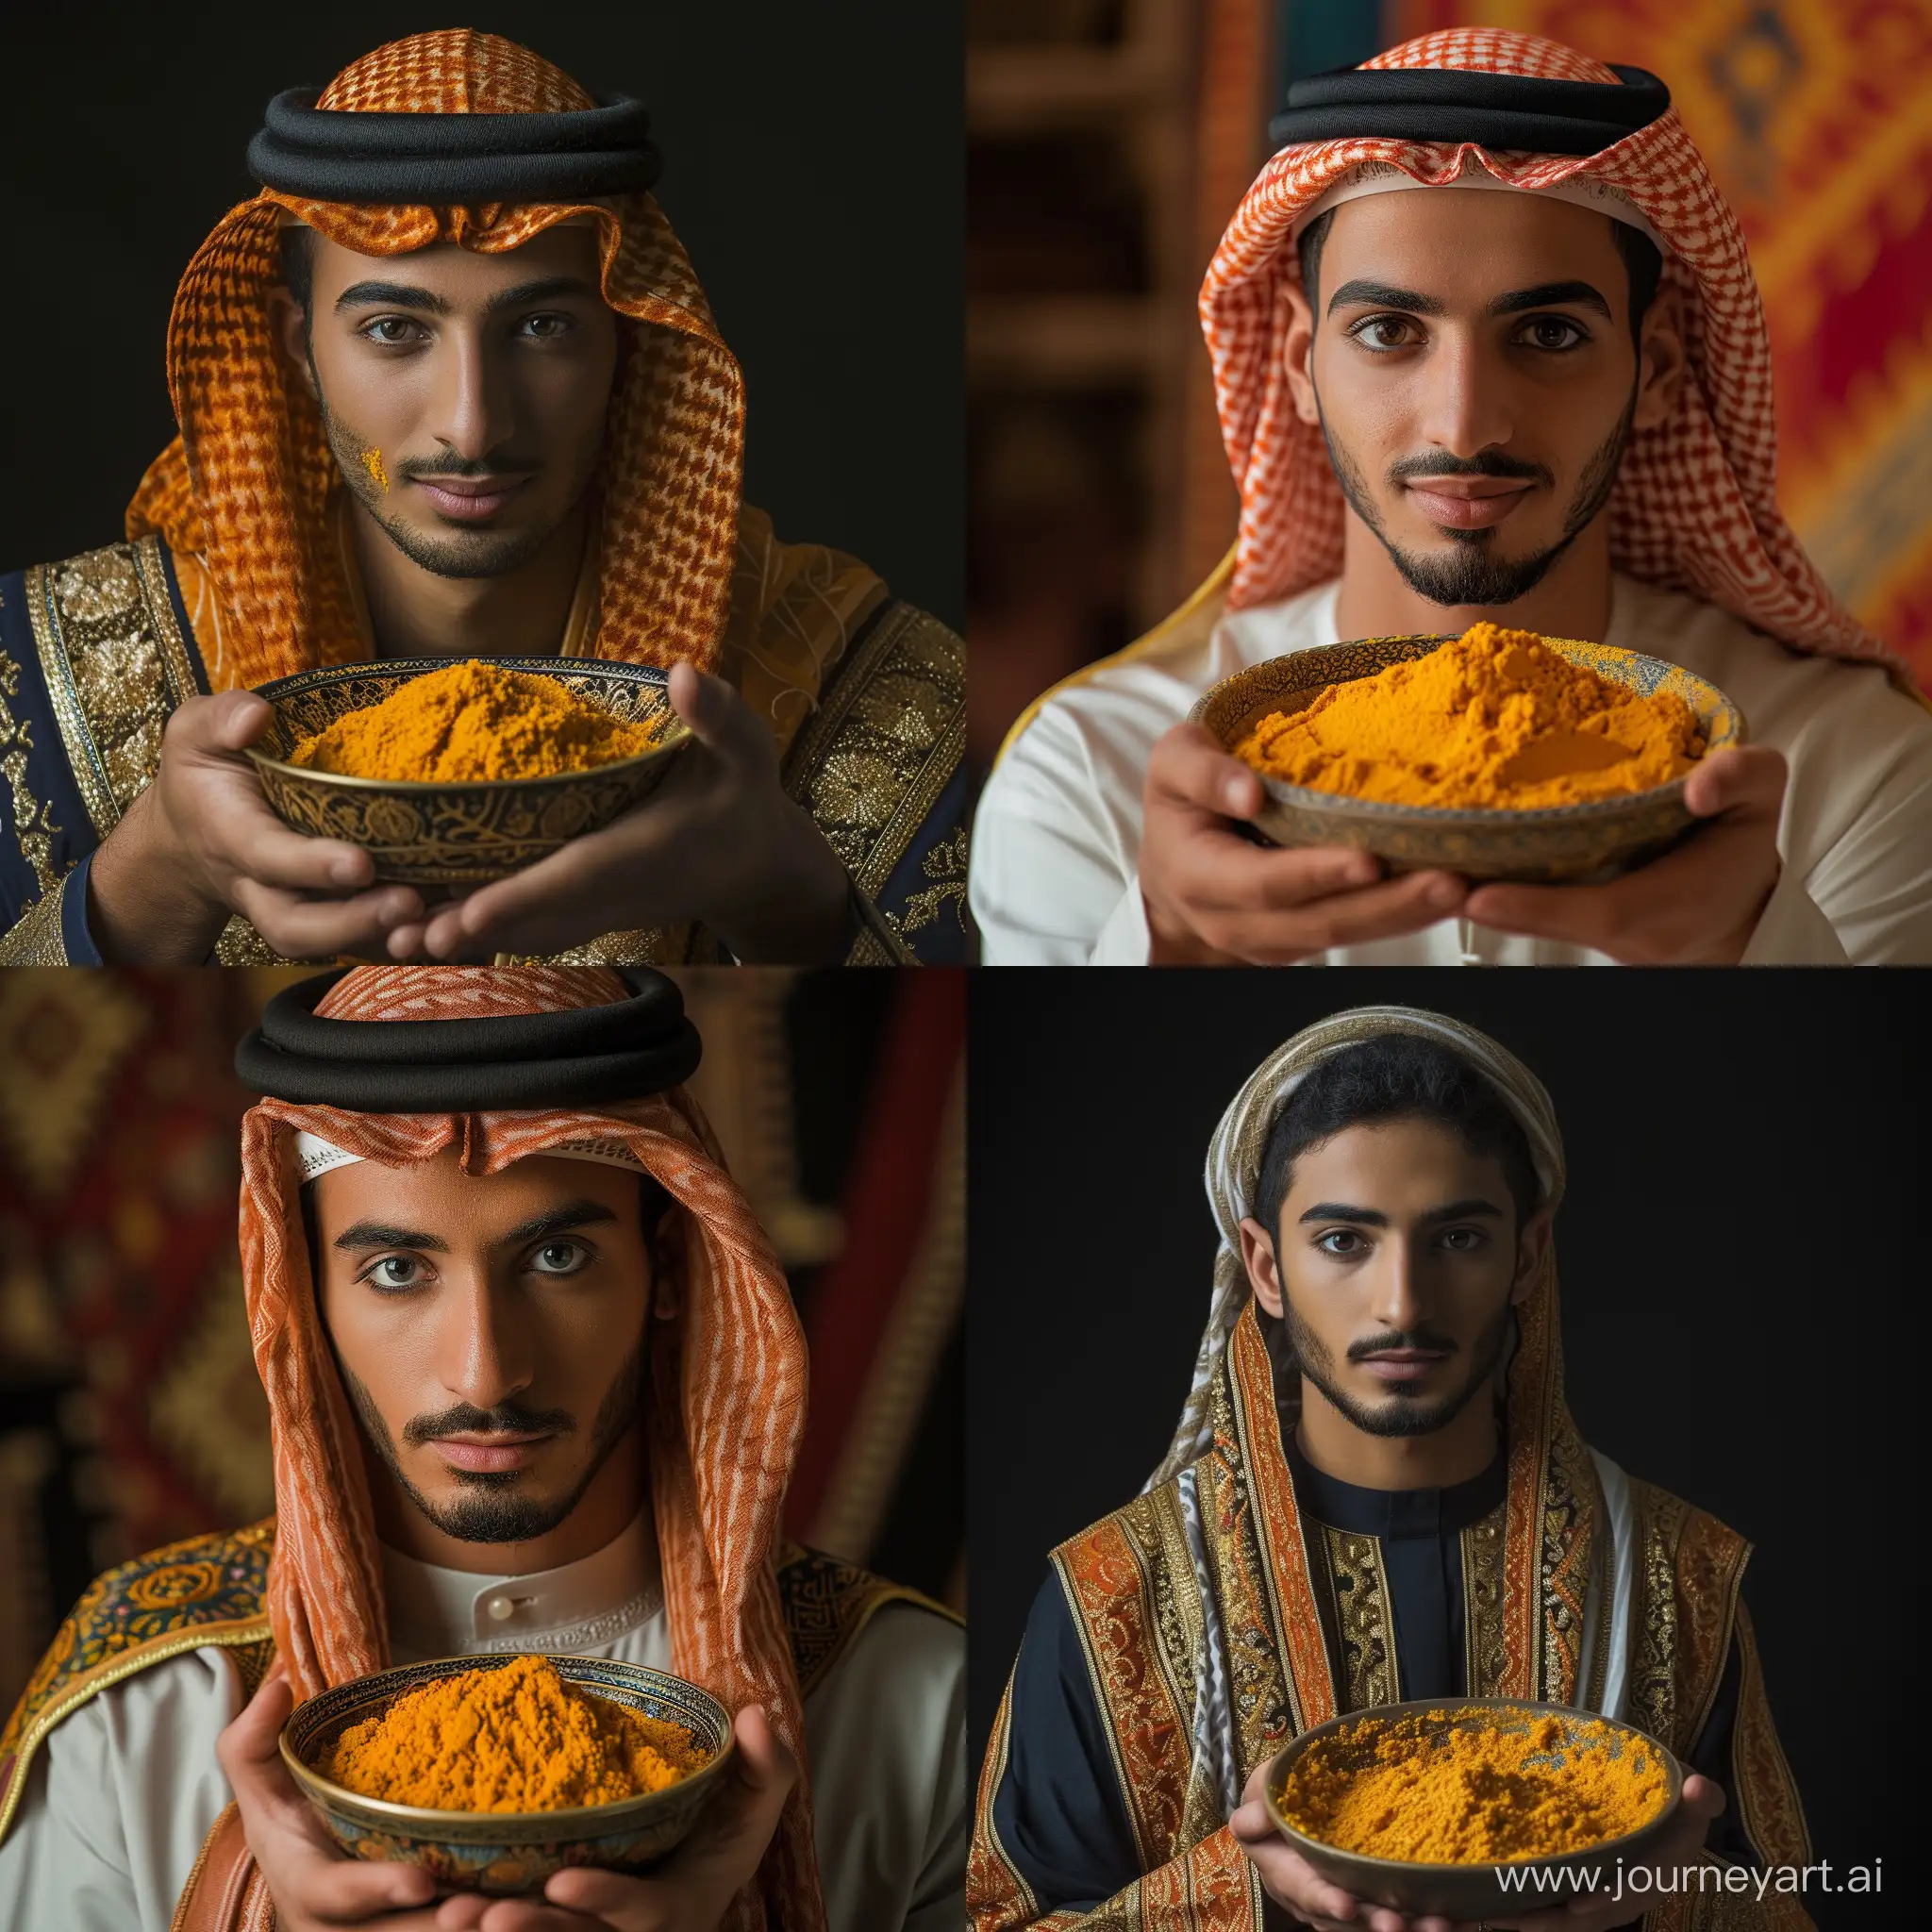 Real and natural photo of a man in Arabic dress holding a bowl of turmeric. Full detail of turmeric bowl and young man's face. The turmeric paste should be in the middle of the picture.